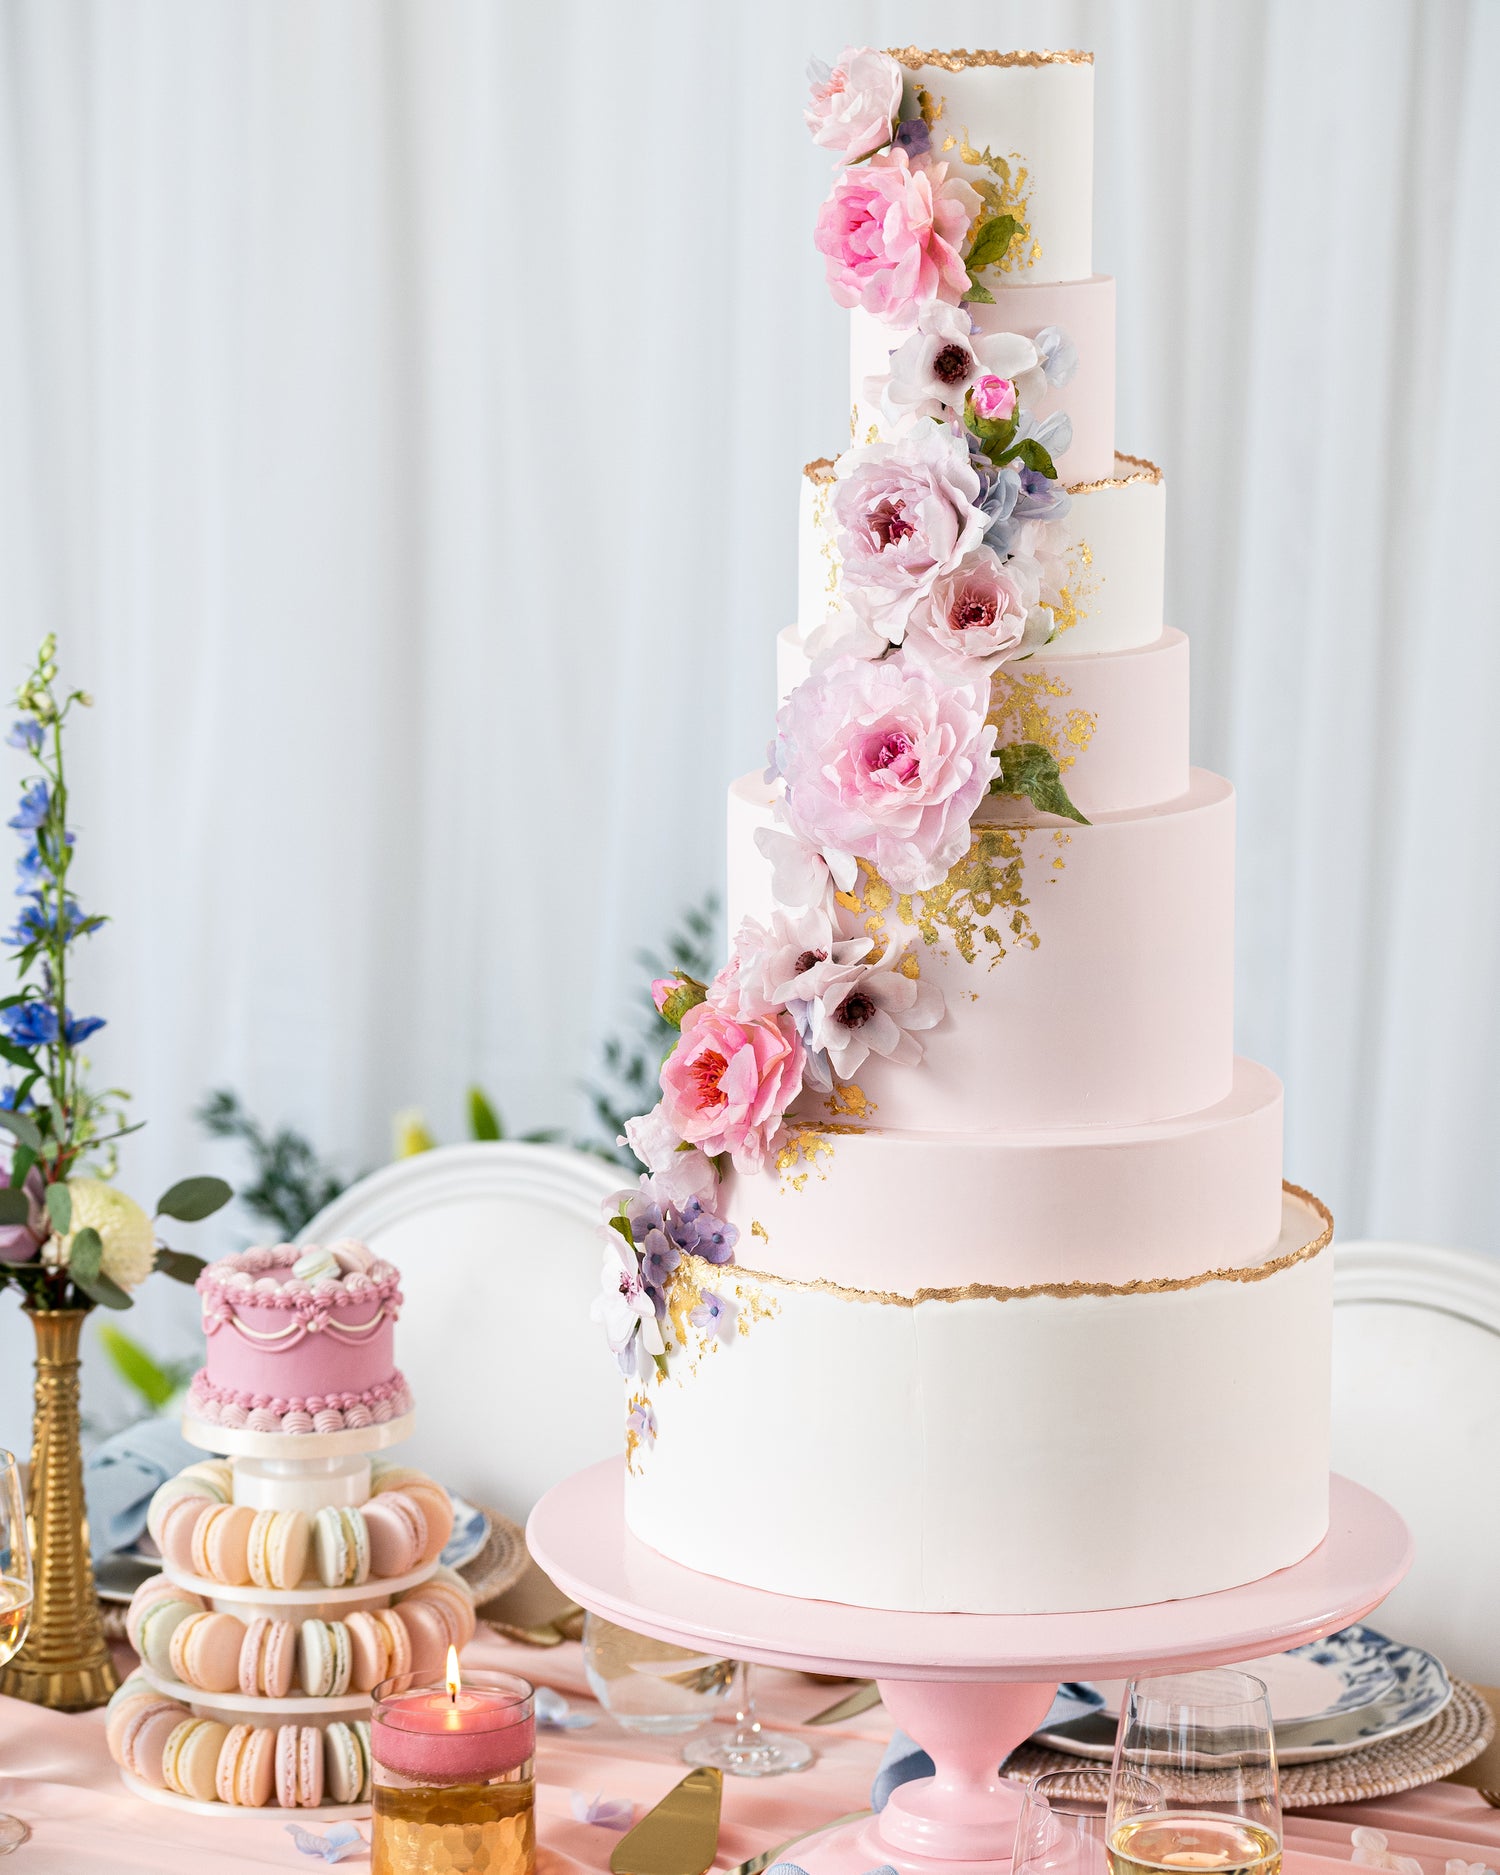 elegant flowers on tall pink and white wedding cake with macaron tower, gold leaf accents, custom wedding cake in halifax by sugar nursery cake shop